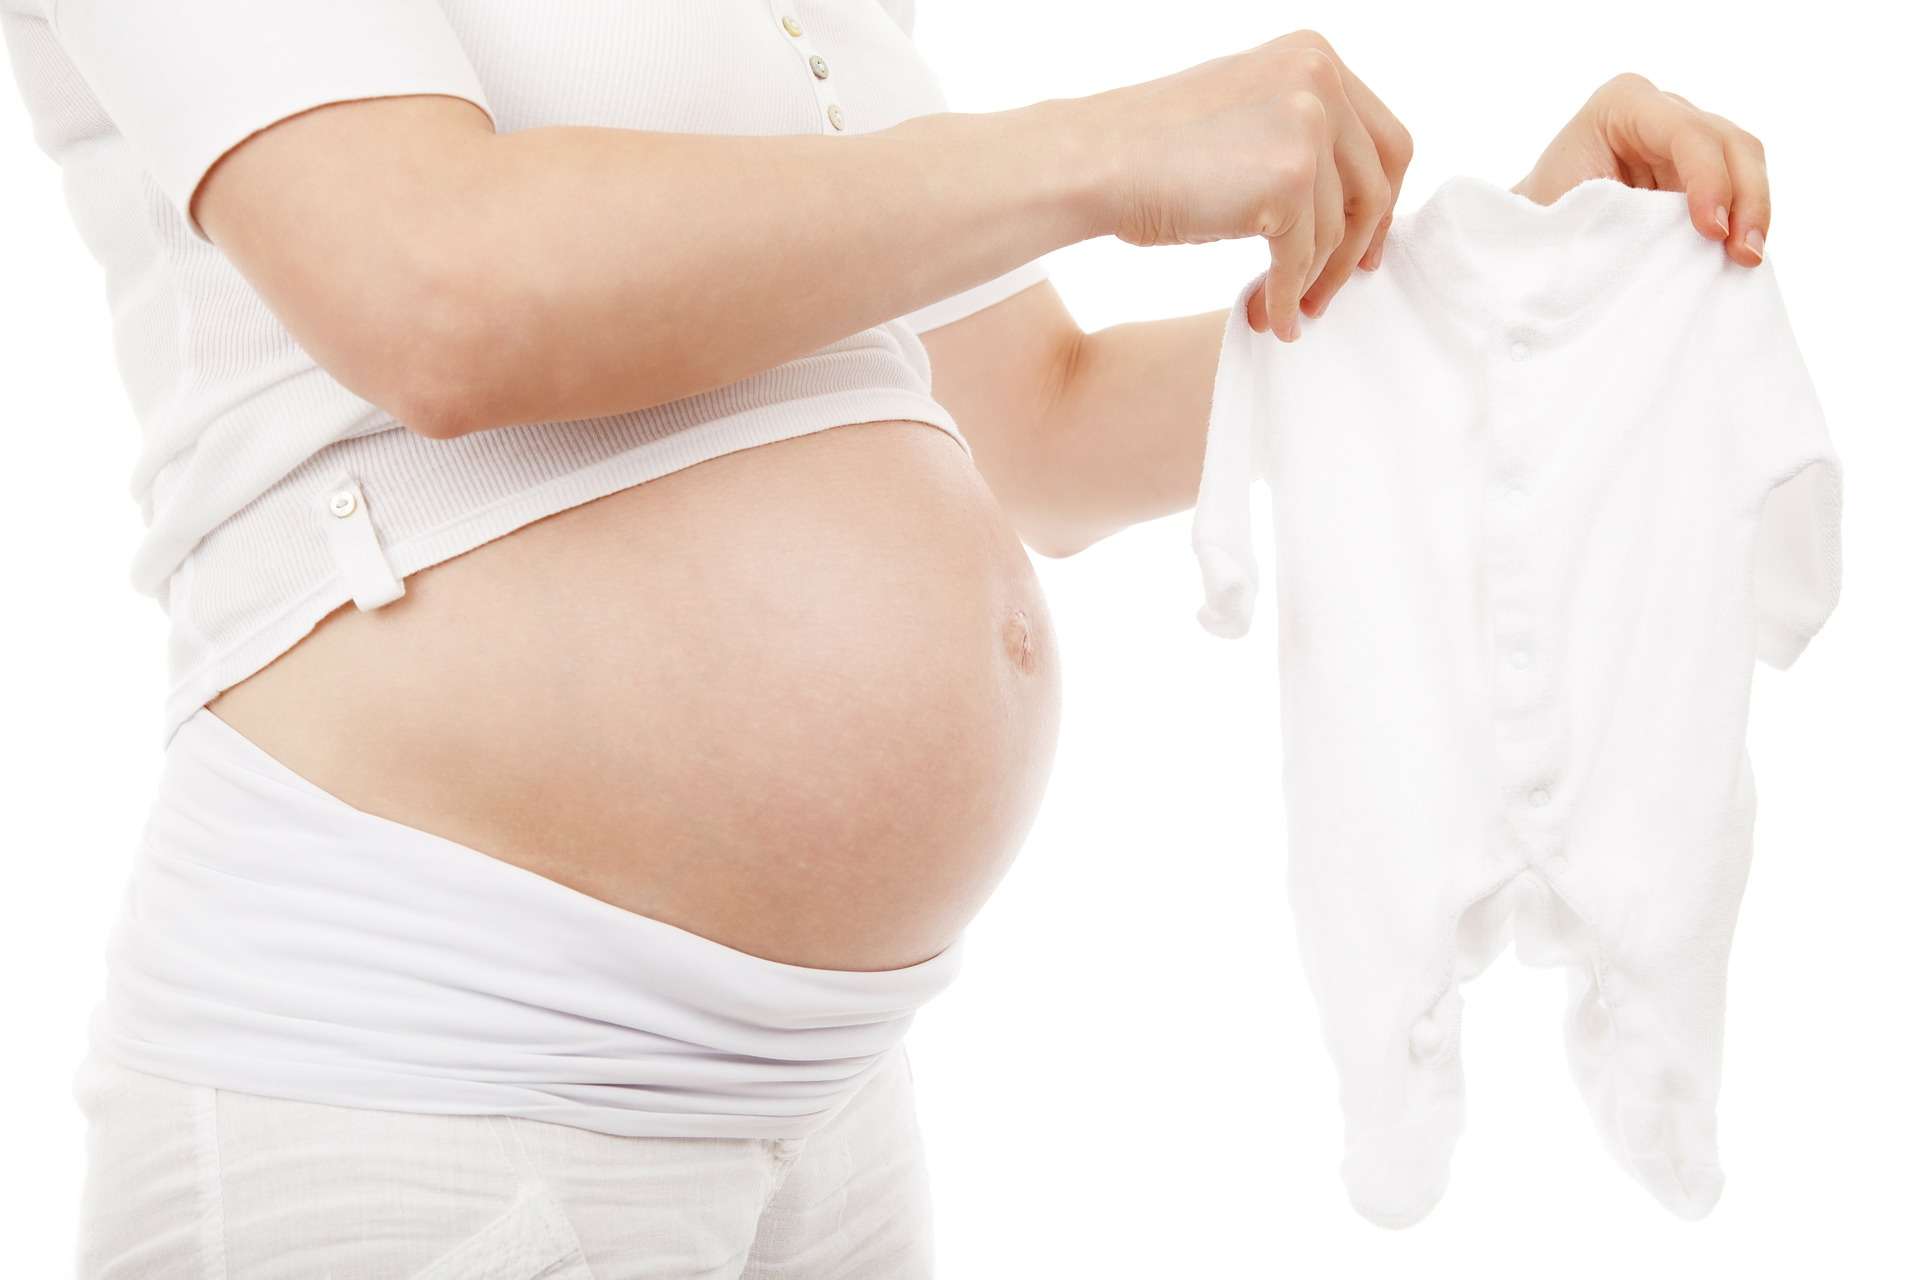 LadiesAndBabies: What is The Best Time To Get Pregnant?